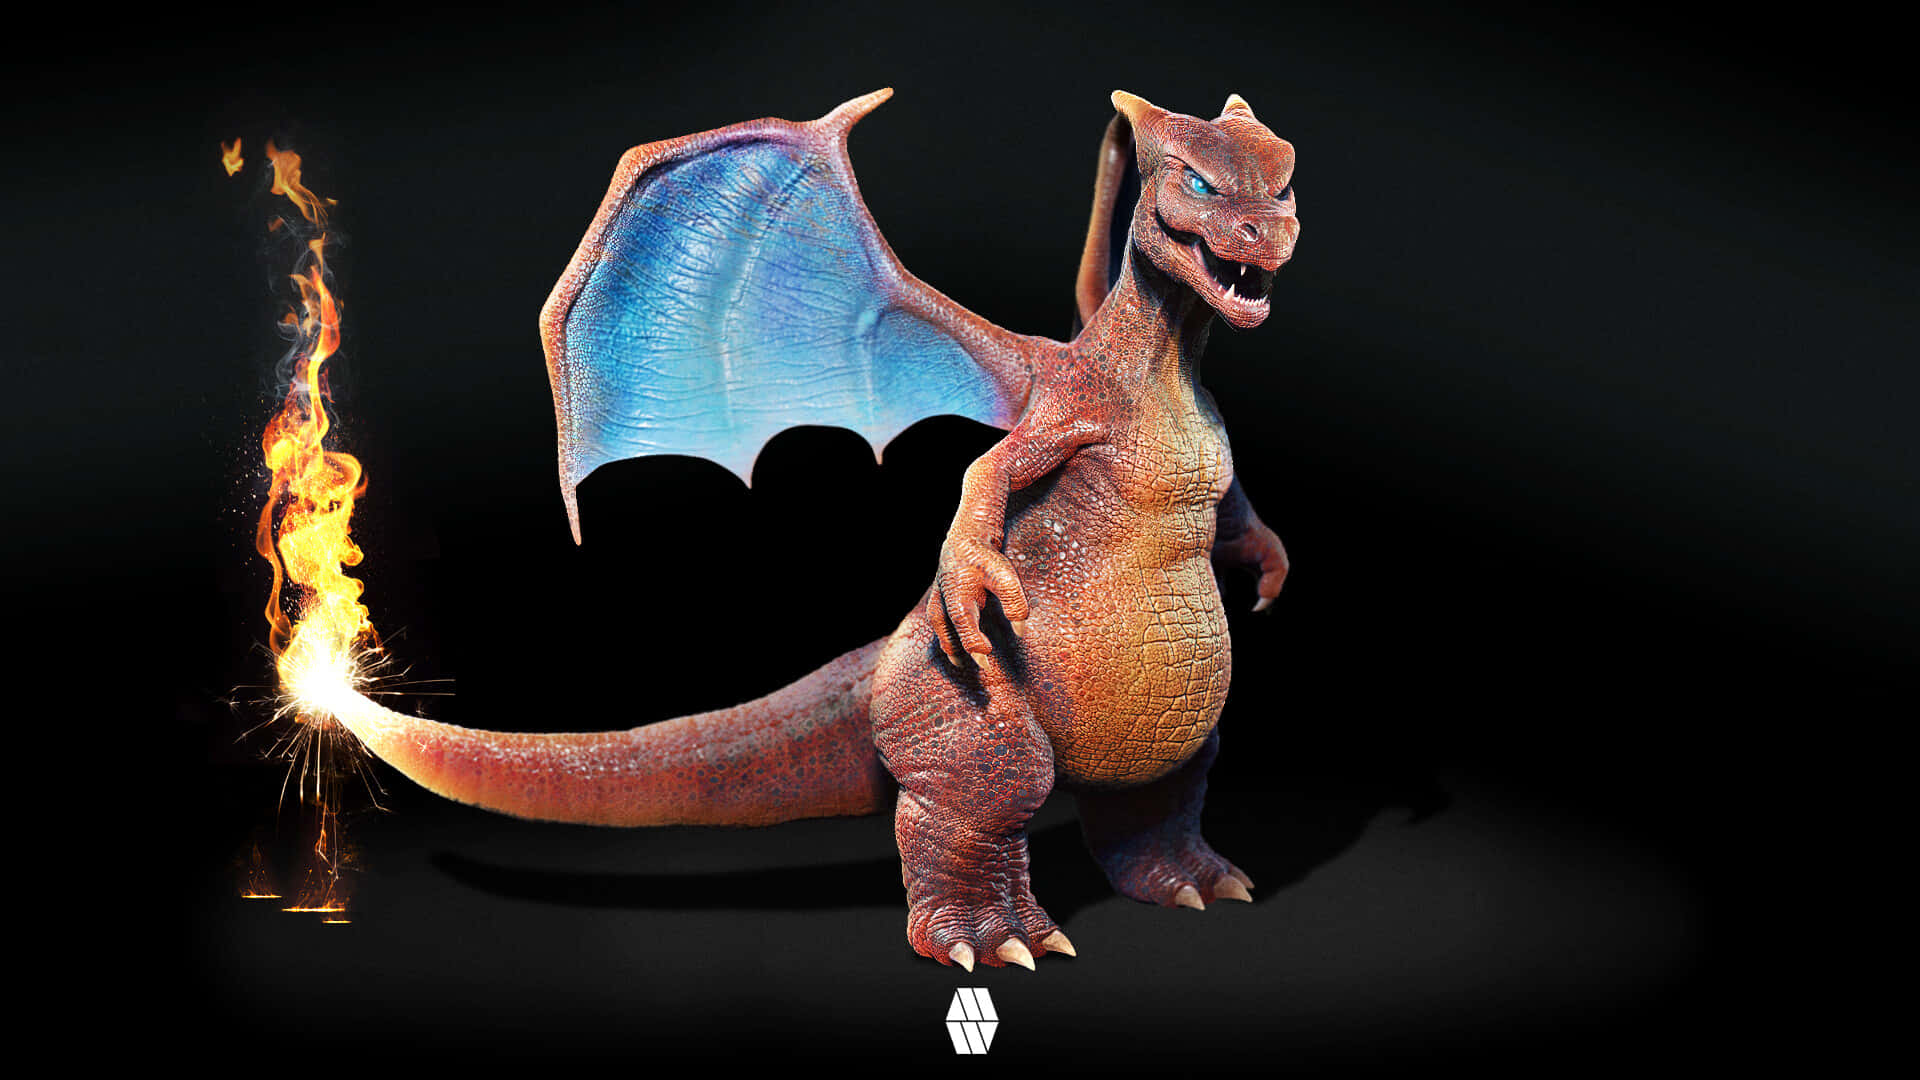 Charizard, the fire-breathing Pokemon with steely wings and vibrant orange fire.